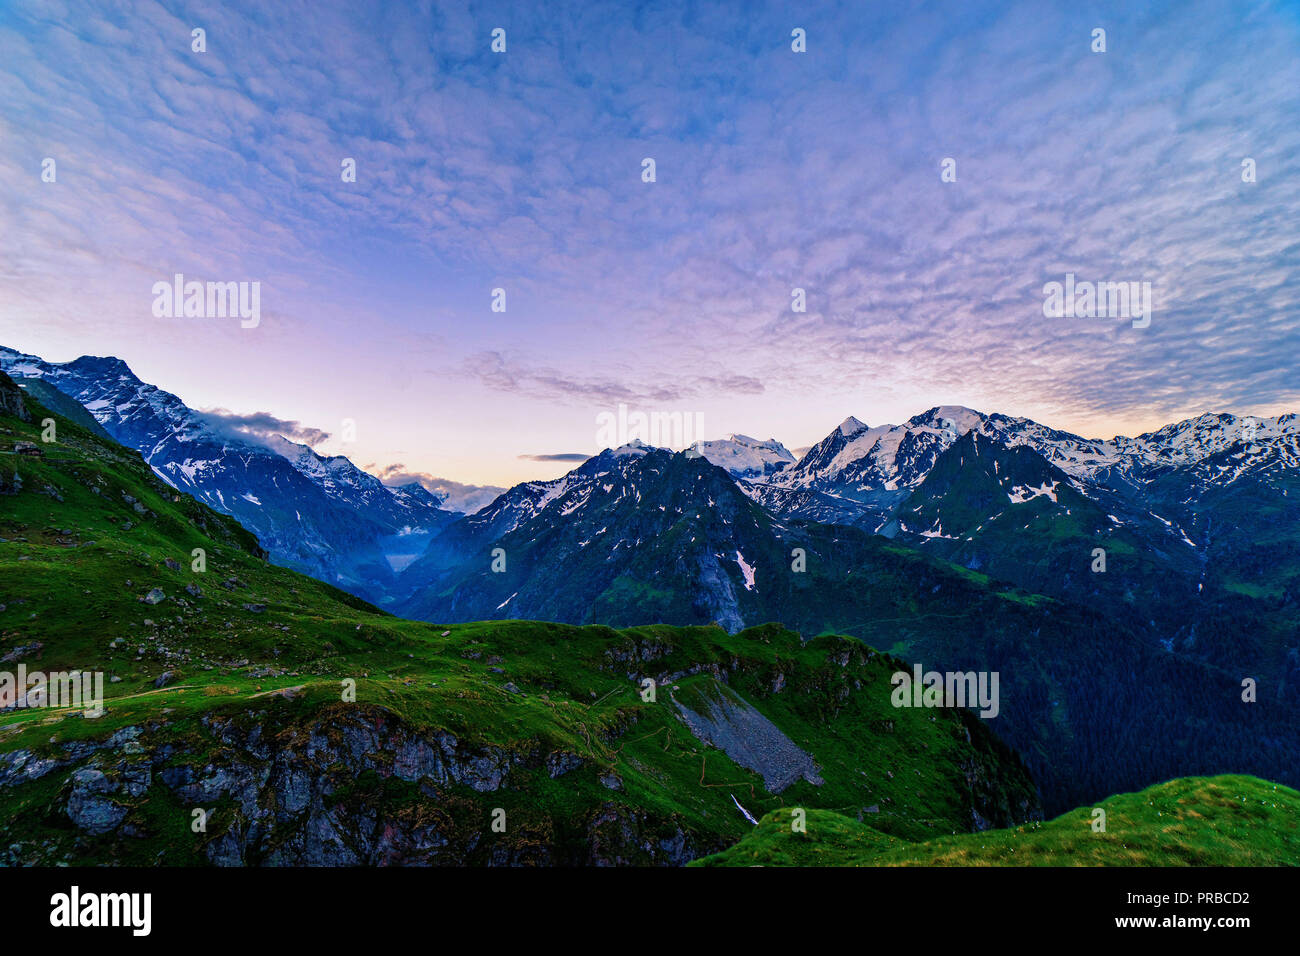 Scenic view of beautiful Swiss Alps mountains. Blue hour sunrise with pink and blue tones, Verbier, Canton du Valais, Wallis, Switzerland. Stock Photo